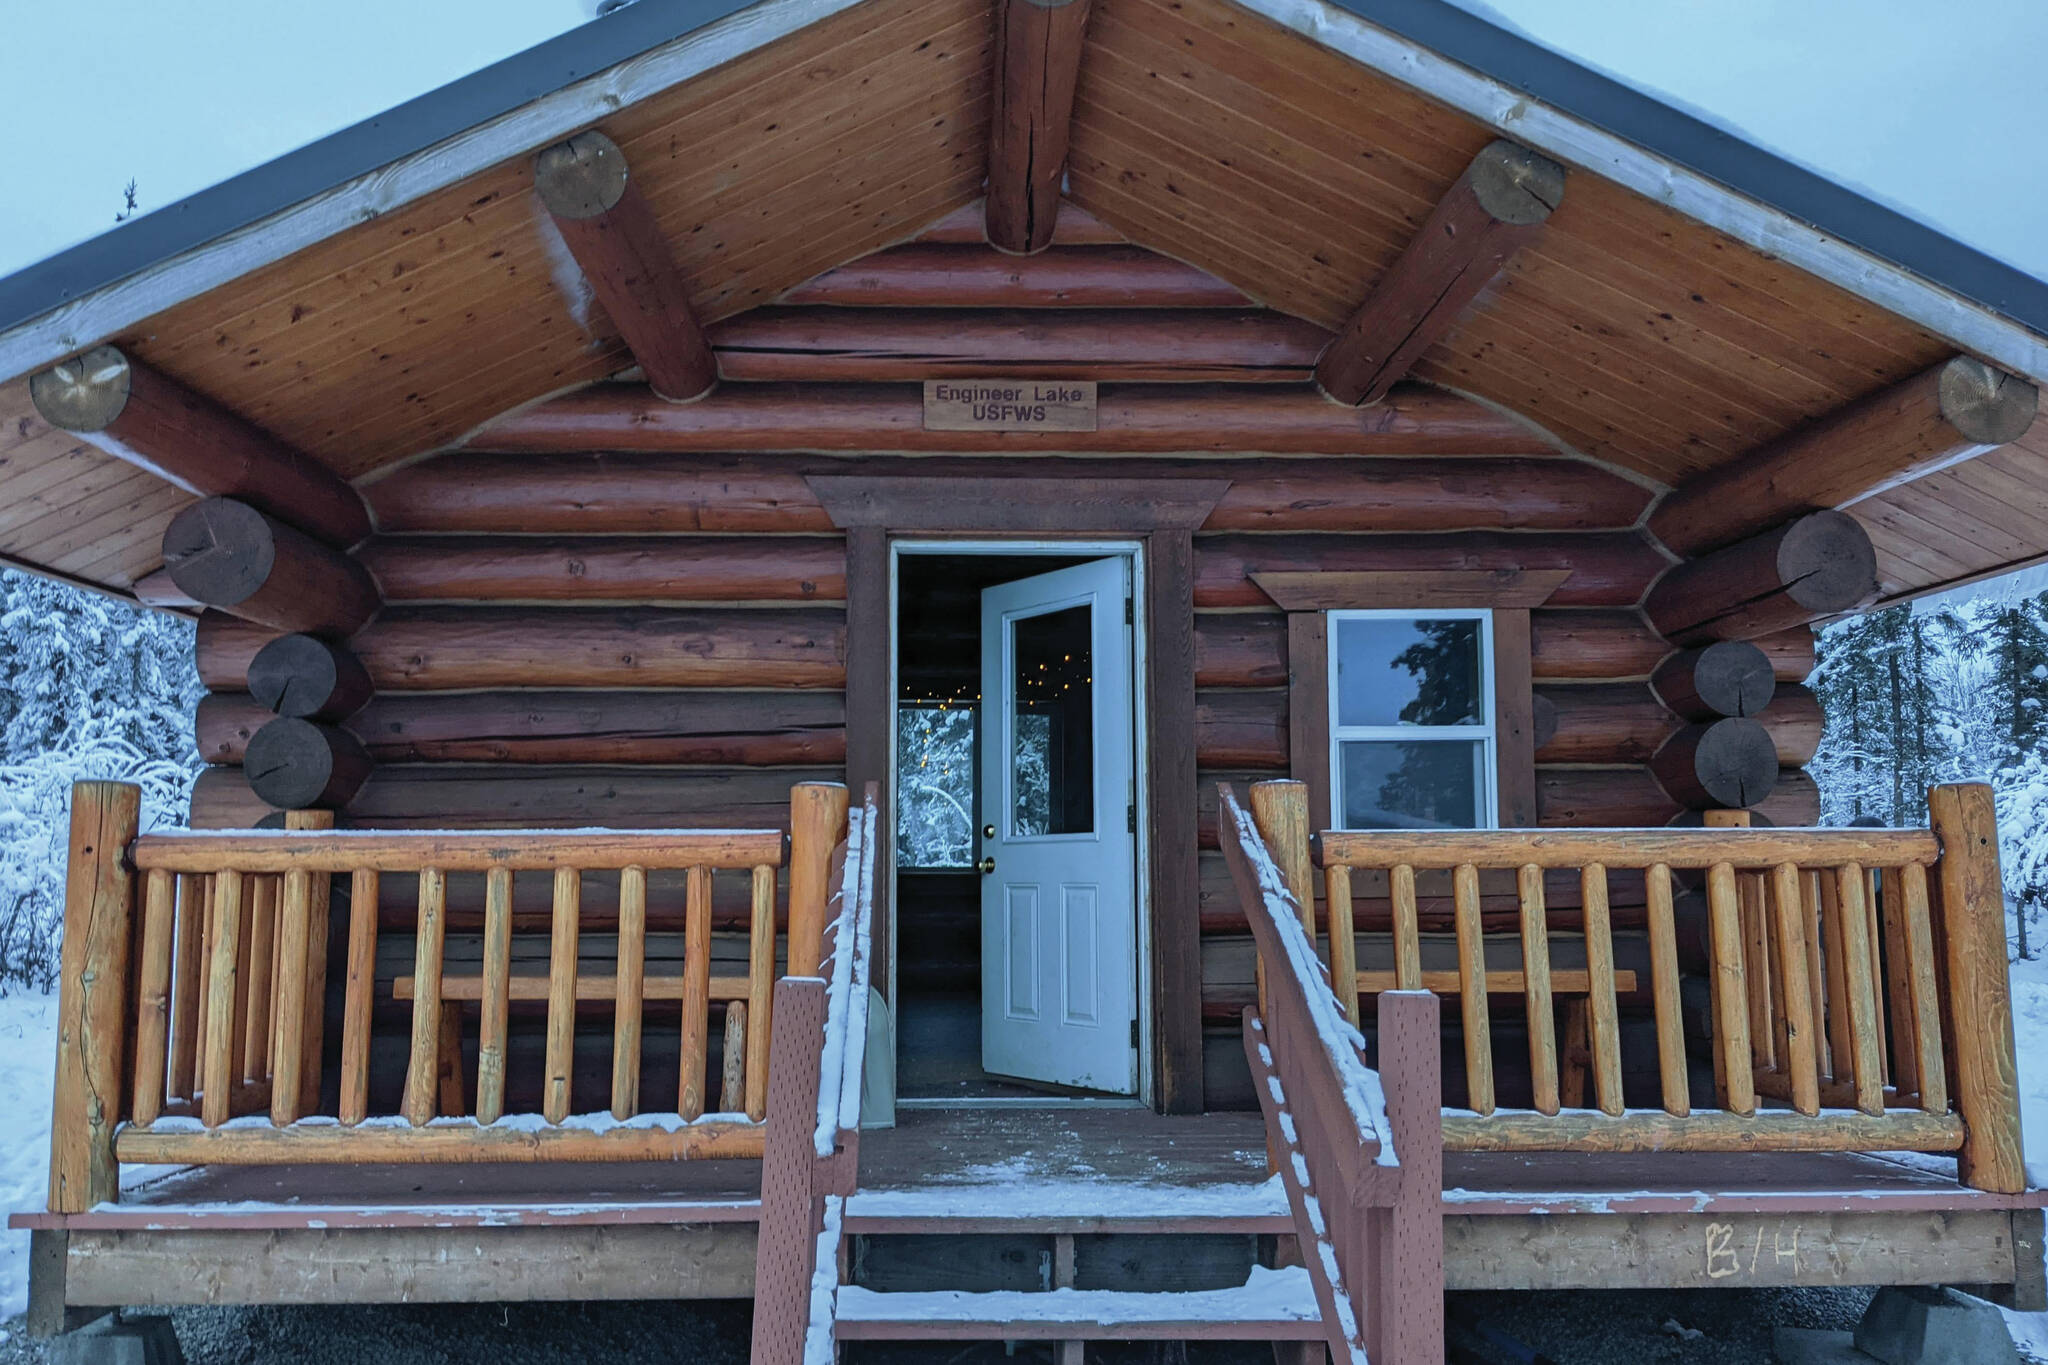 Engineer Lake Cabin can be seen in the Kenai National Wildlife Refuge on Nov. 21, 2021. (Photo by Erin Thompson/Peninsula Clarion)